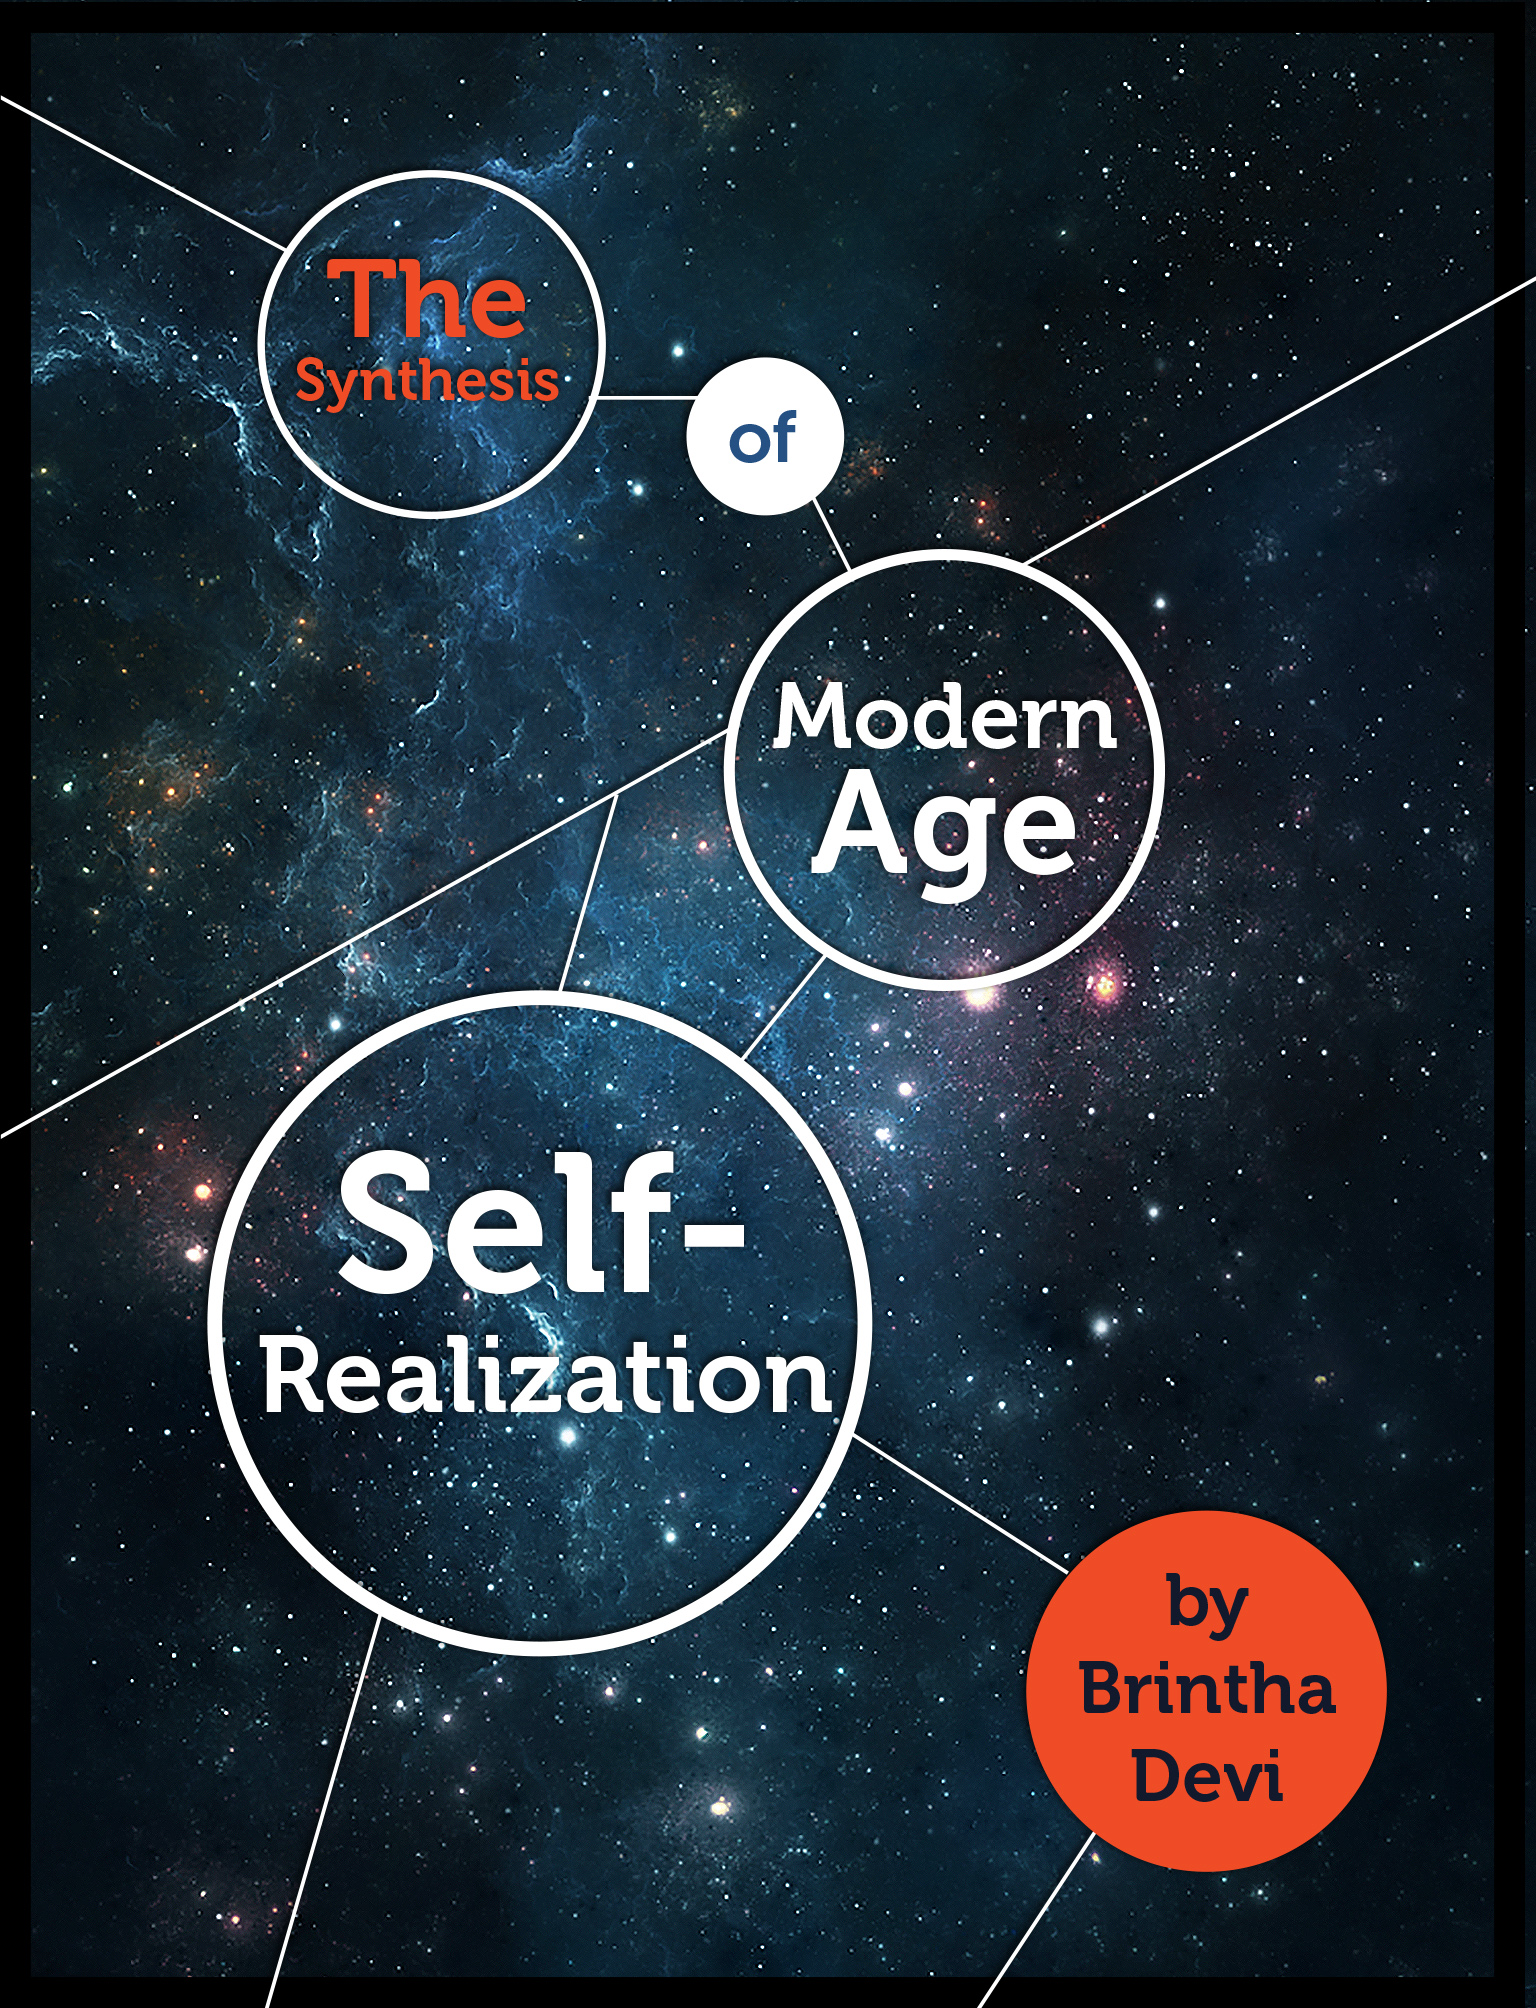 The Synthesis of Modern Age Self-Realization